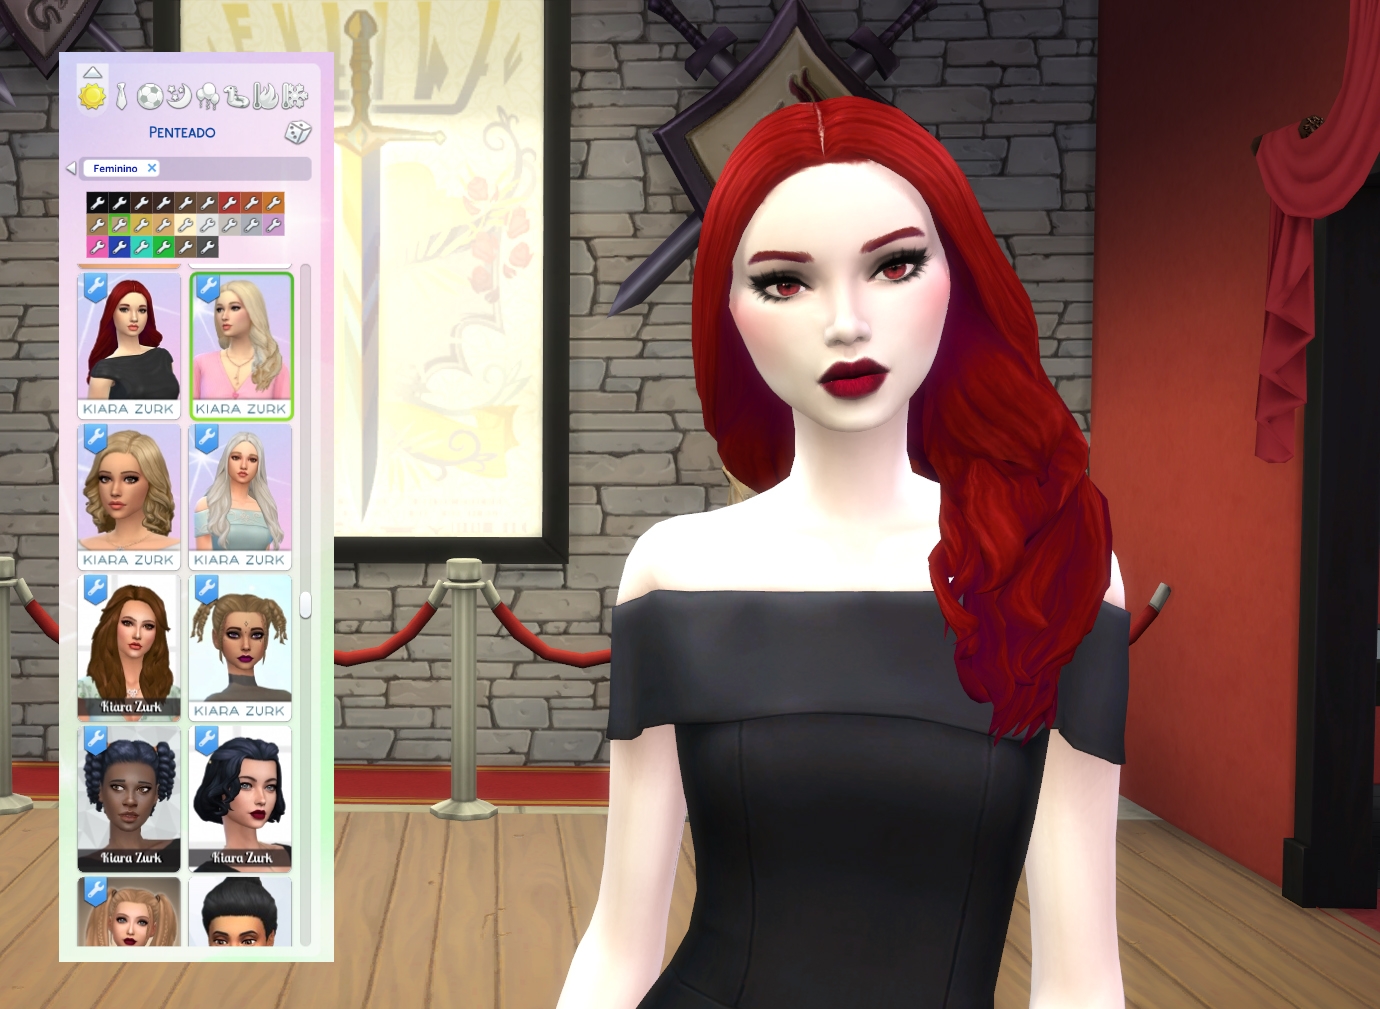 Michelle Hairstyle (new version) - Screenshots - The Sims 4 Create a ...